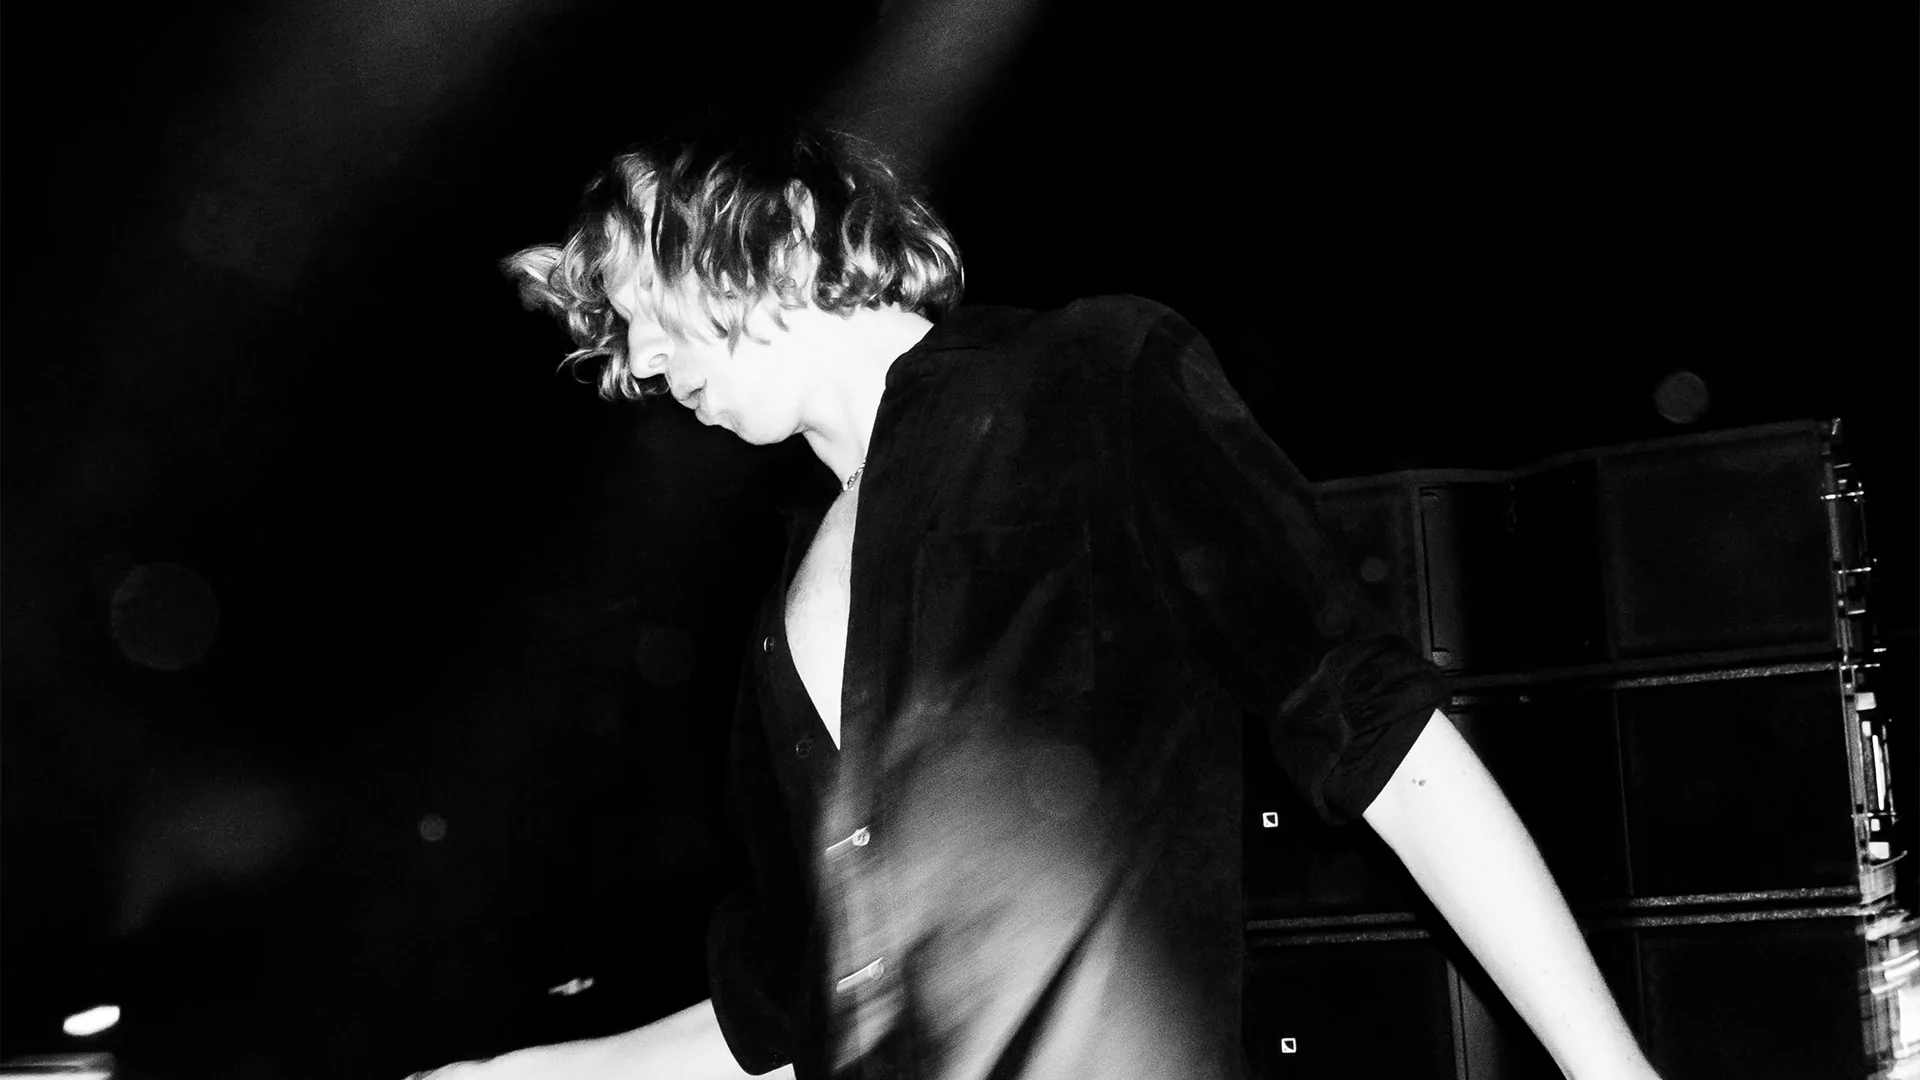 A distorted image of Daniel Avery DJing in black and white, his face obscured 